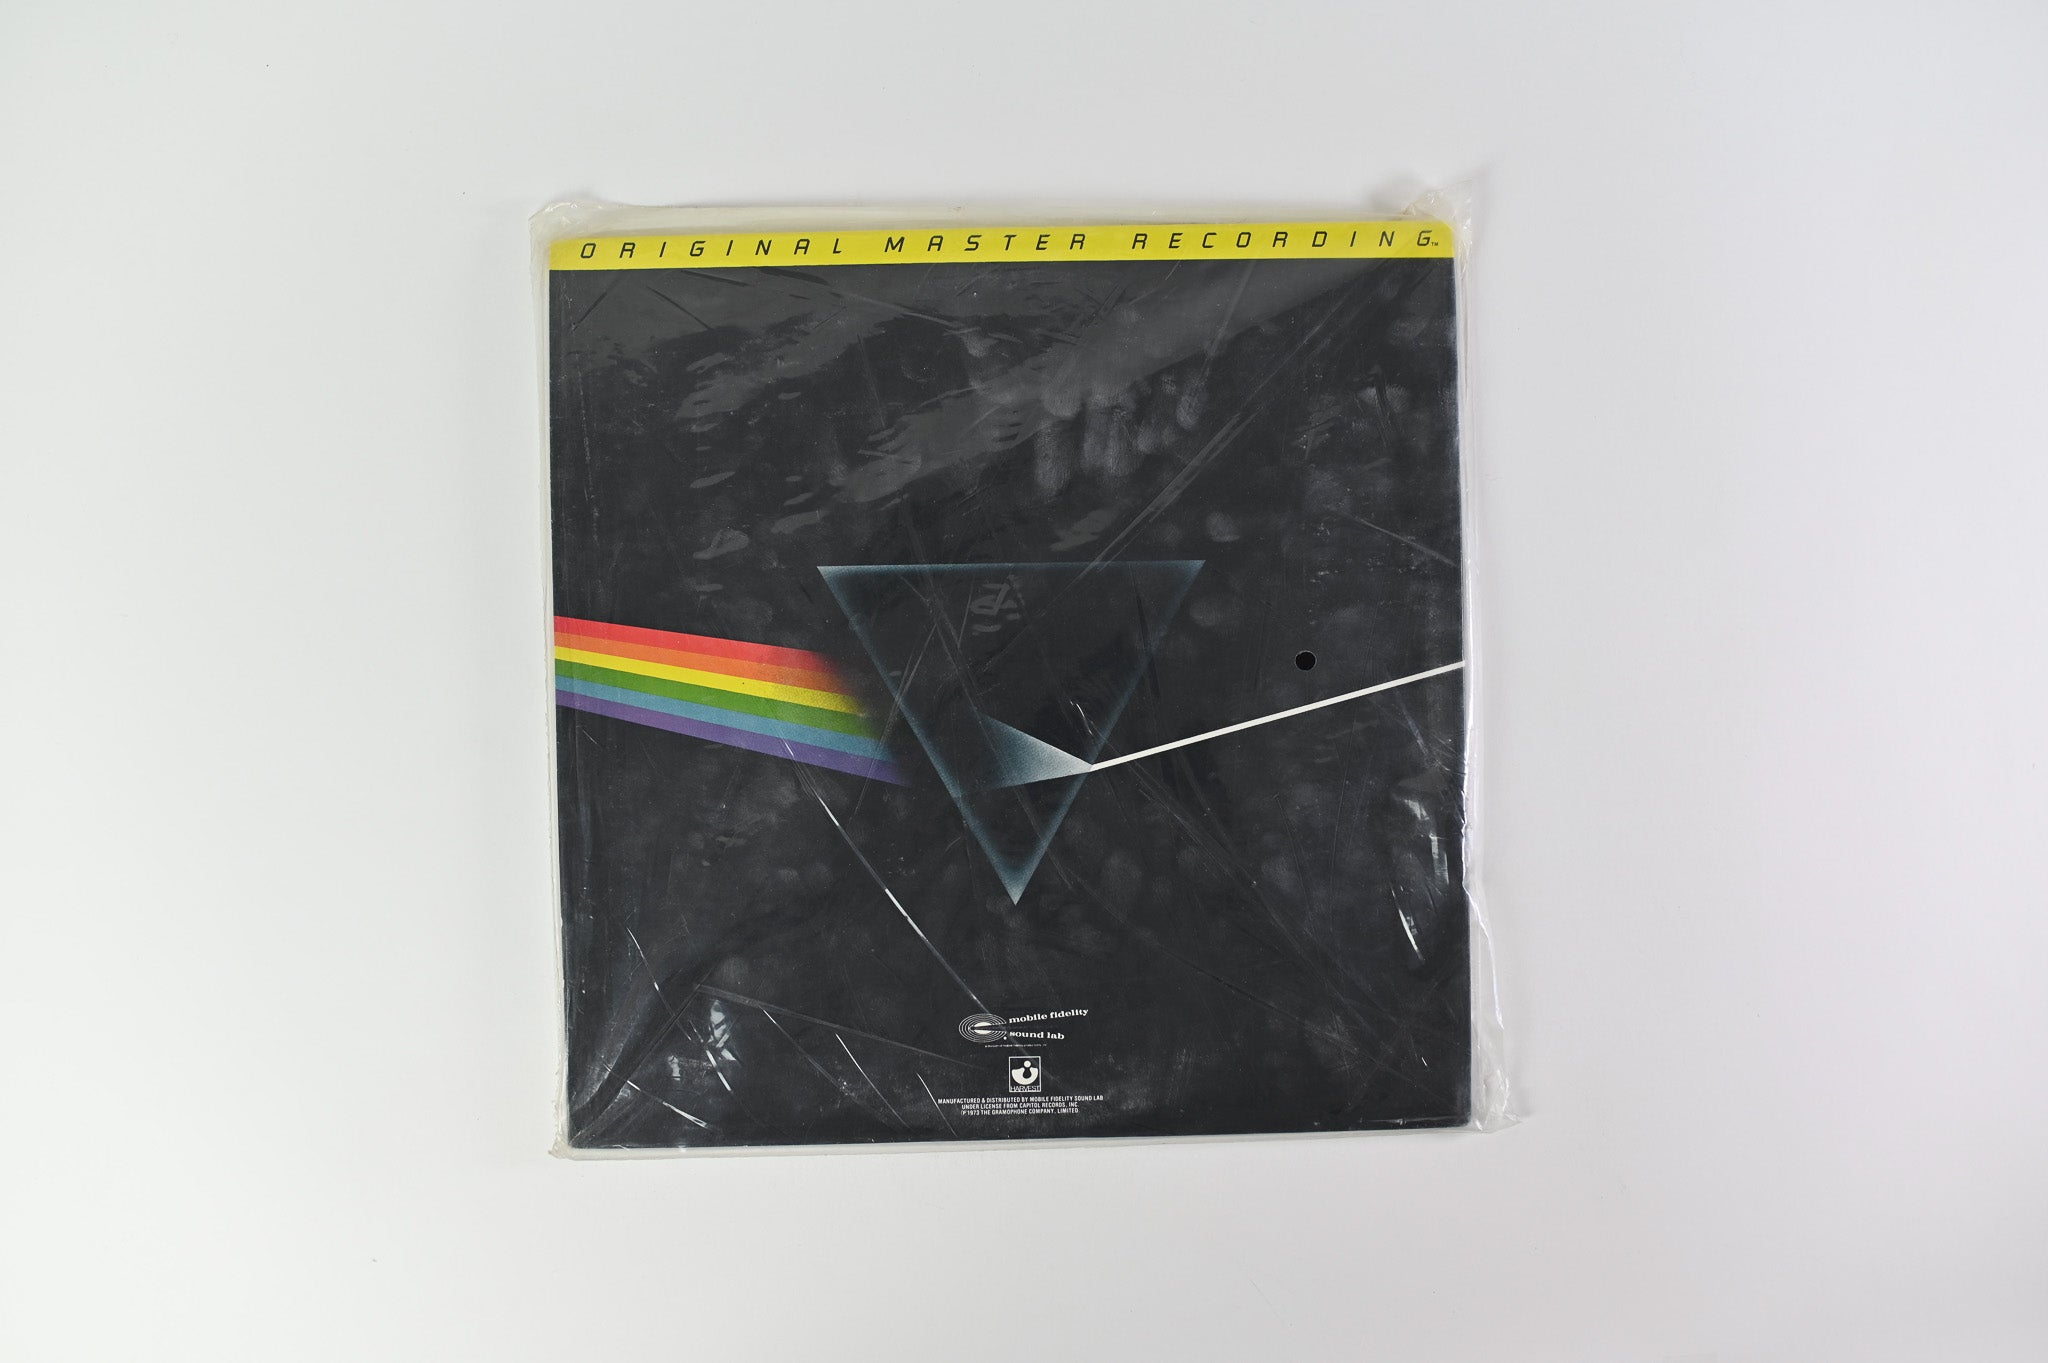 Pink Floyd - The Dark Side Of The Moon Mobile Fidelity Sound Lab Reissue Sealed